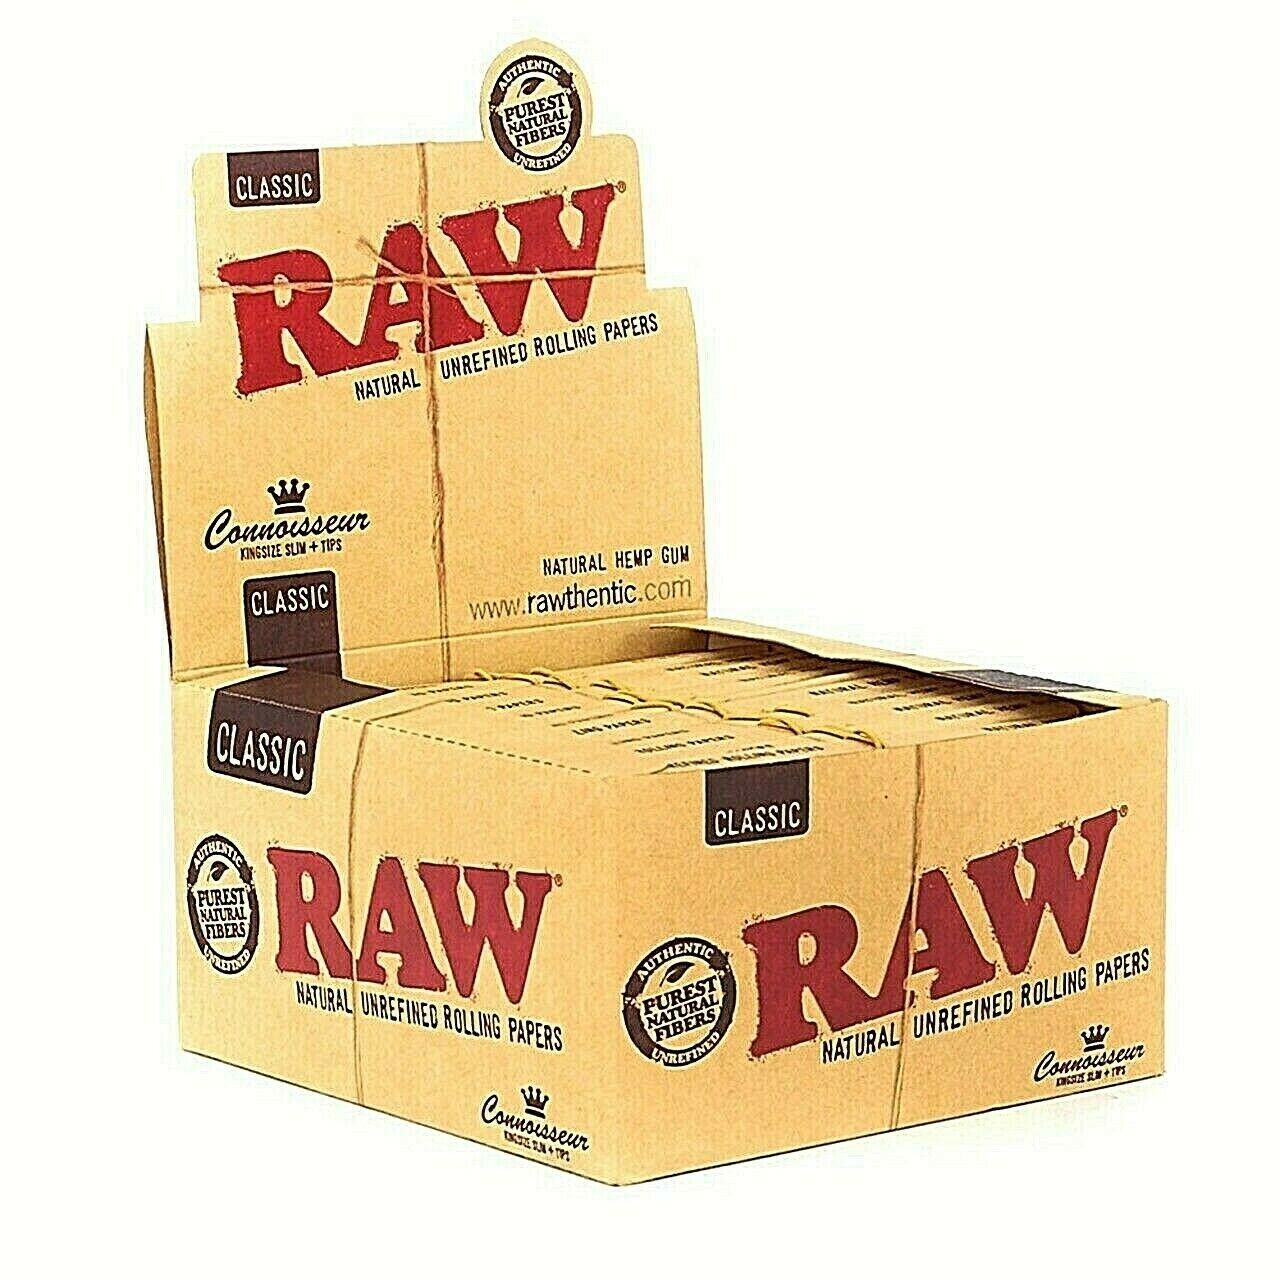 24 X RAW CONNOISSEUR KINGSIZE + TIPS NATURAL ROLLING UNREFINED PAPERS